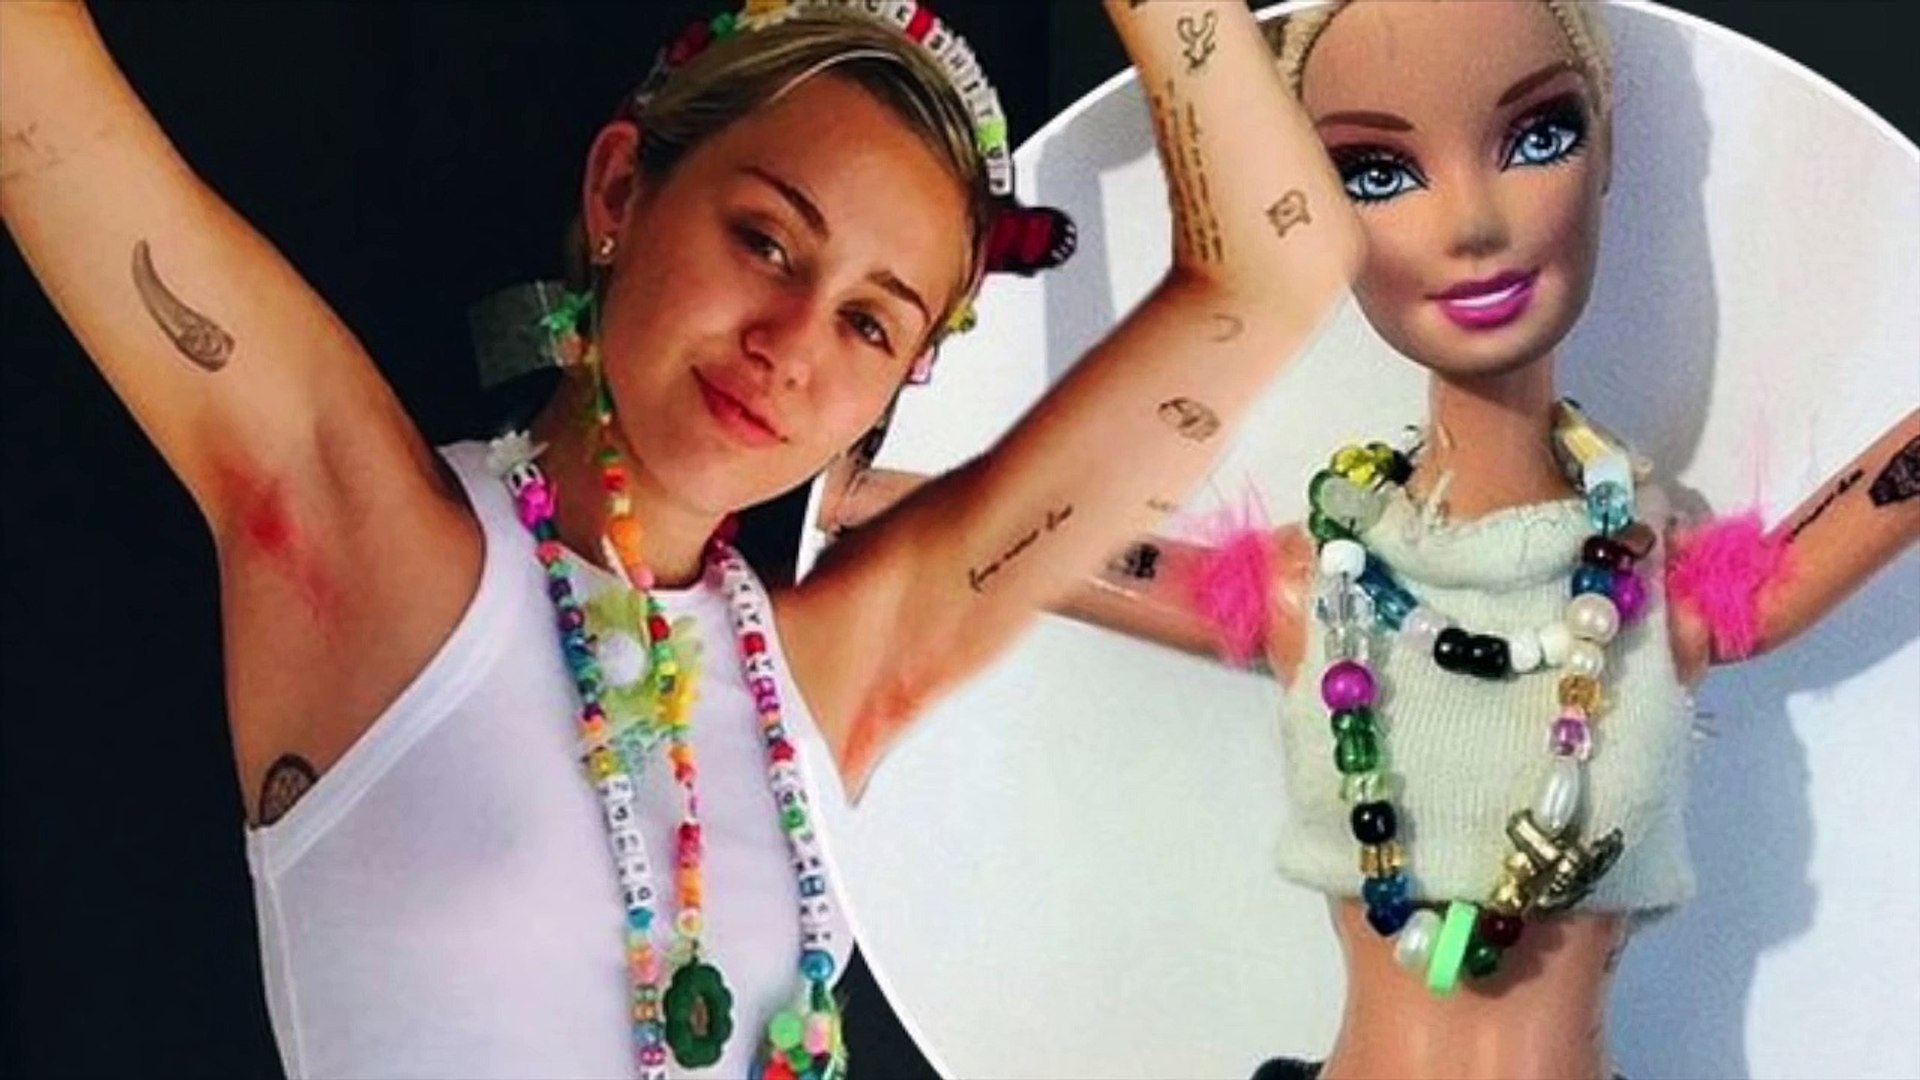 Miley Cyrus dyes her armpit hair pink and possibly somewhere else in latest bizarre selfie